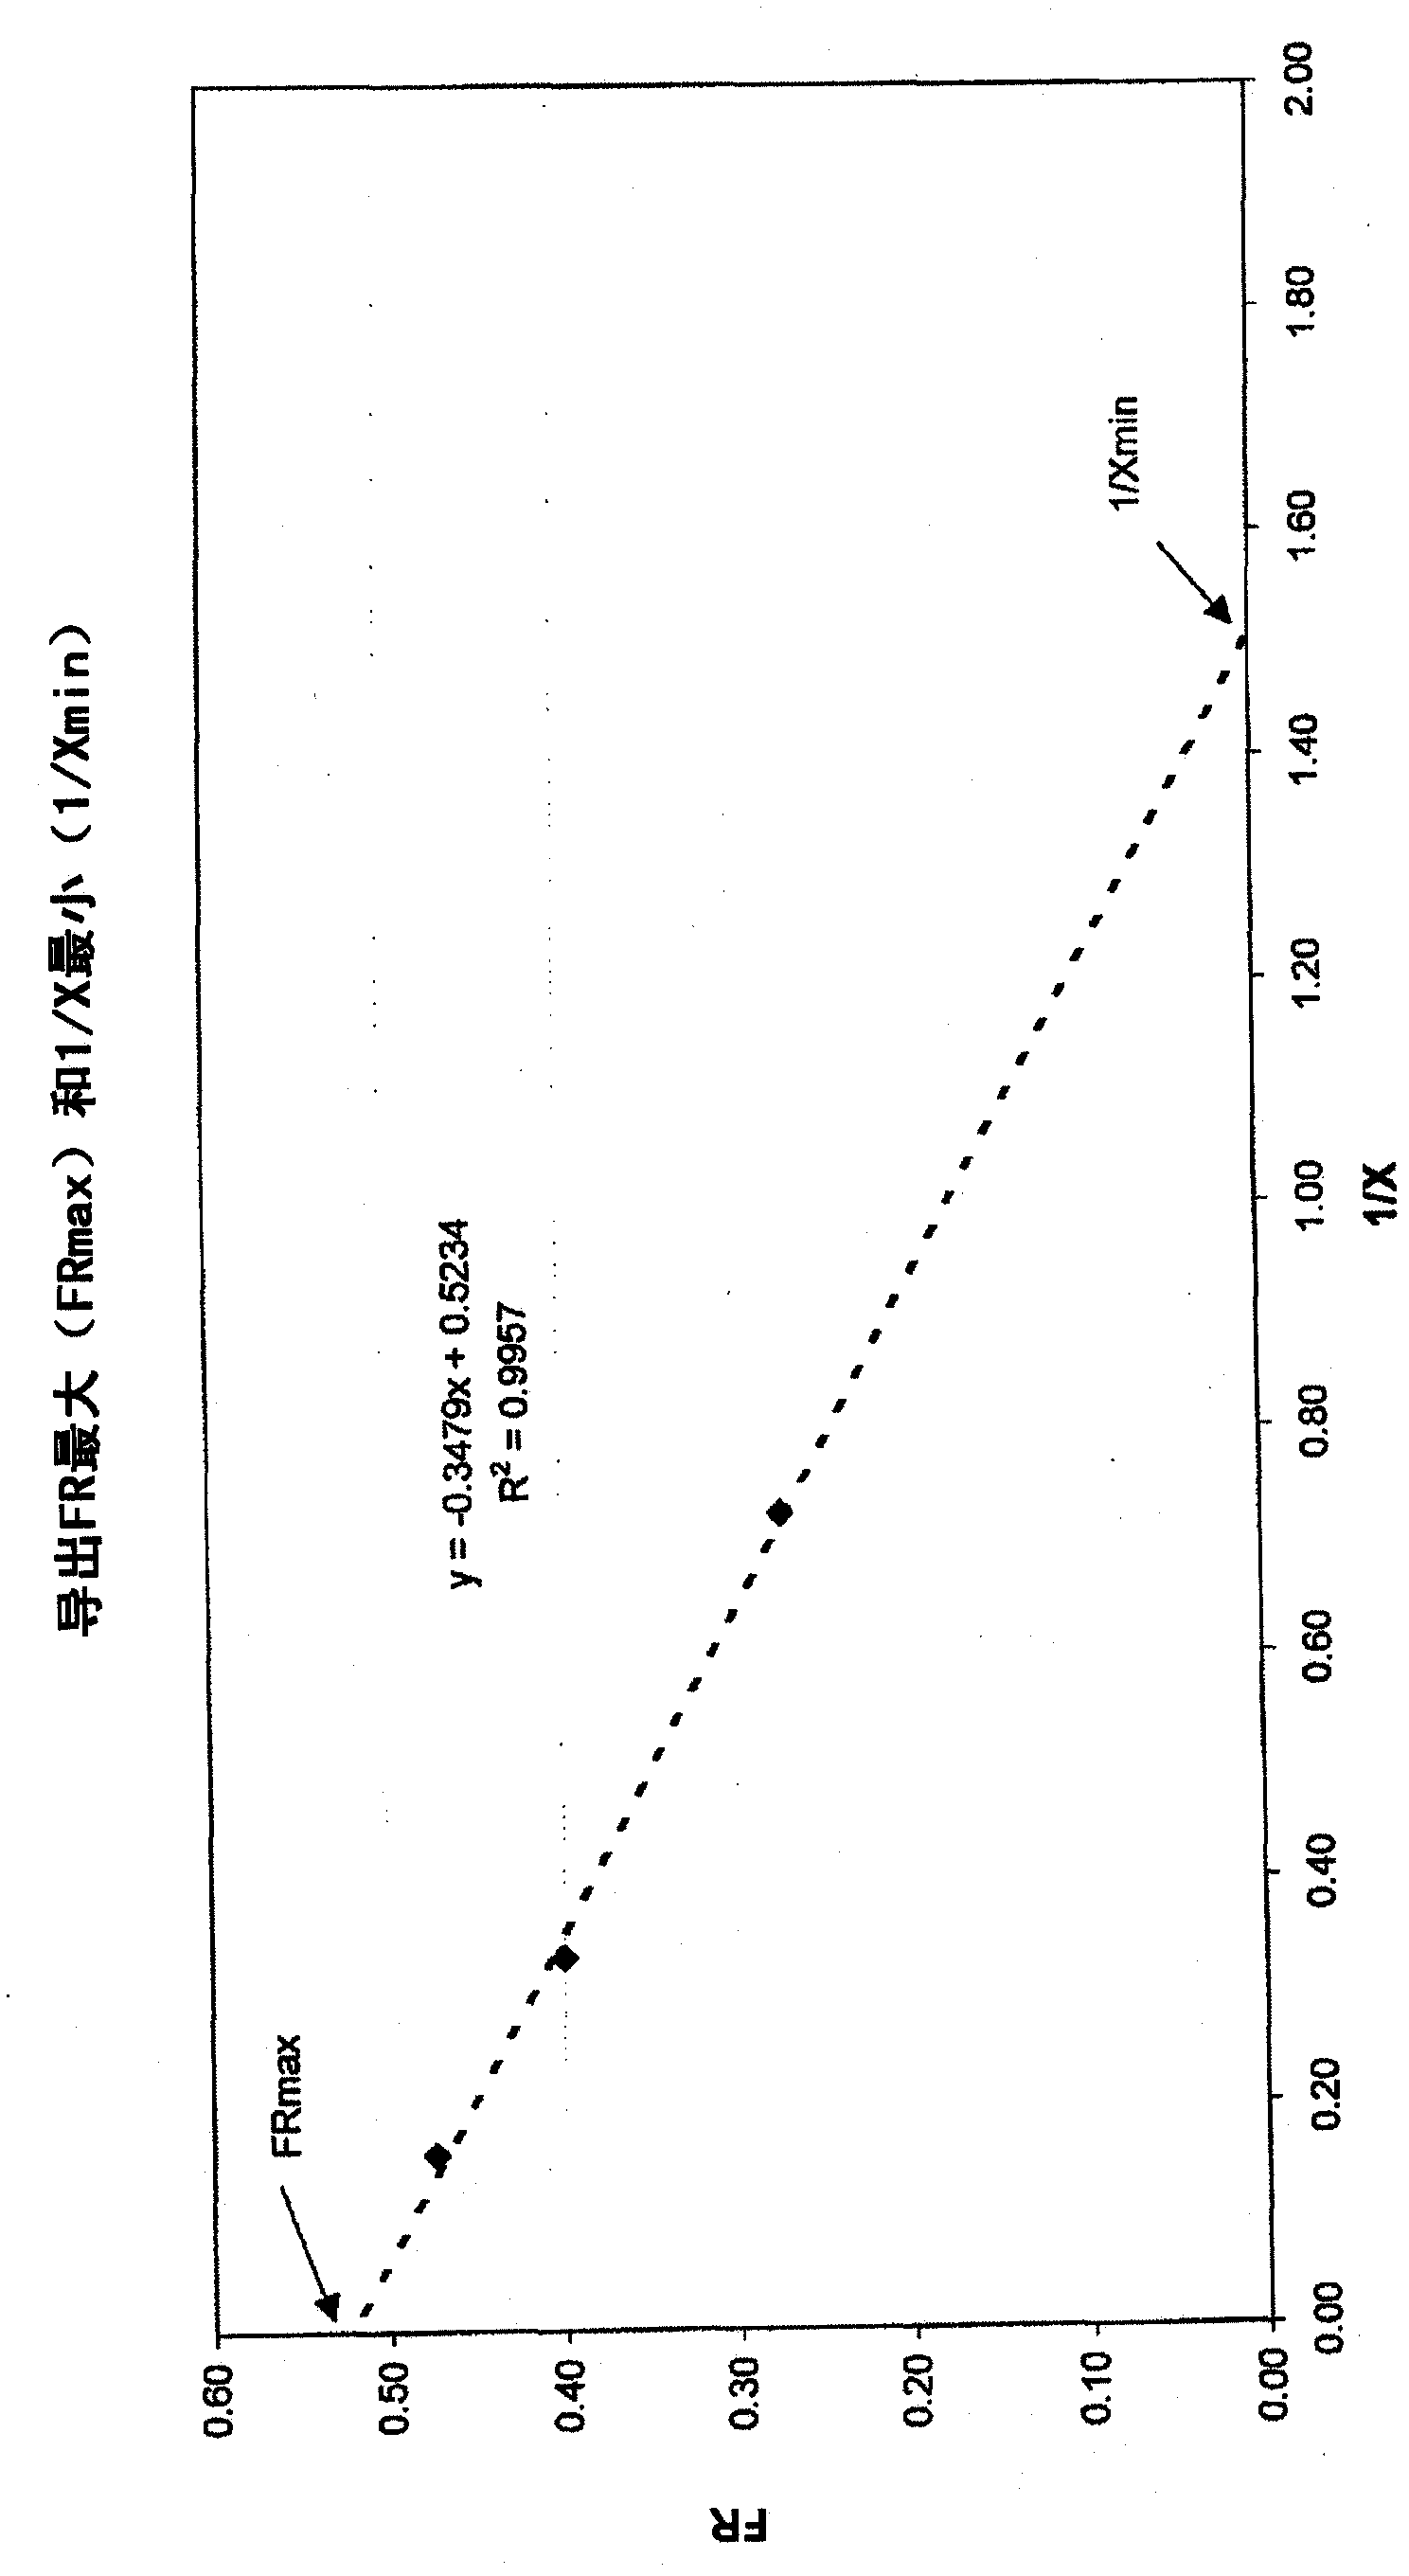 Method for predicting hydrocarbon process stream stability using near infrared spectra